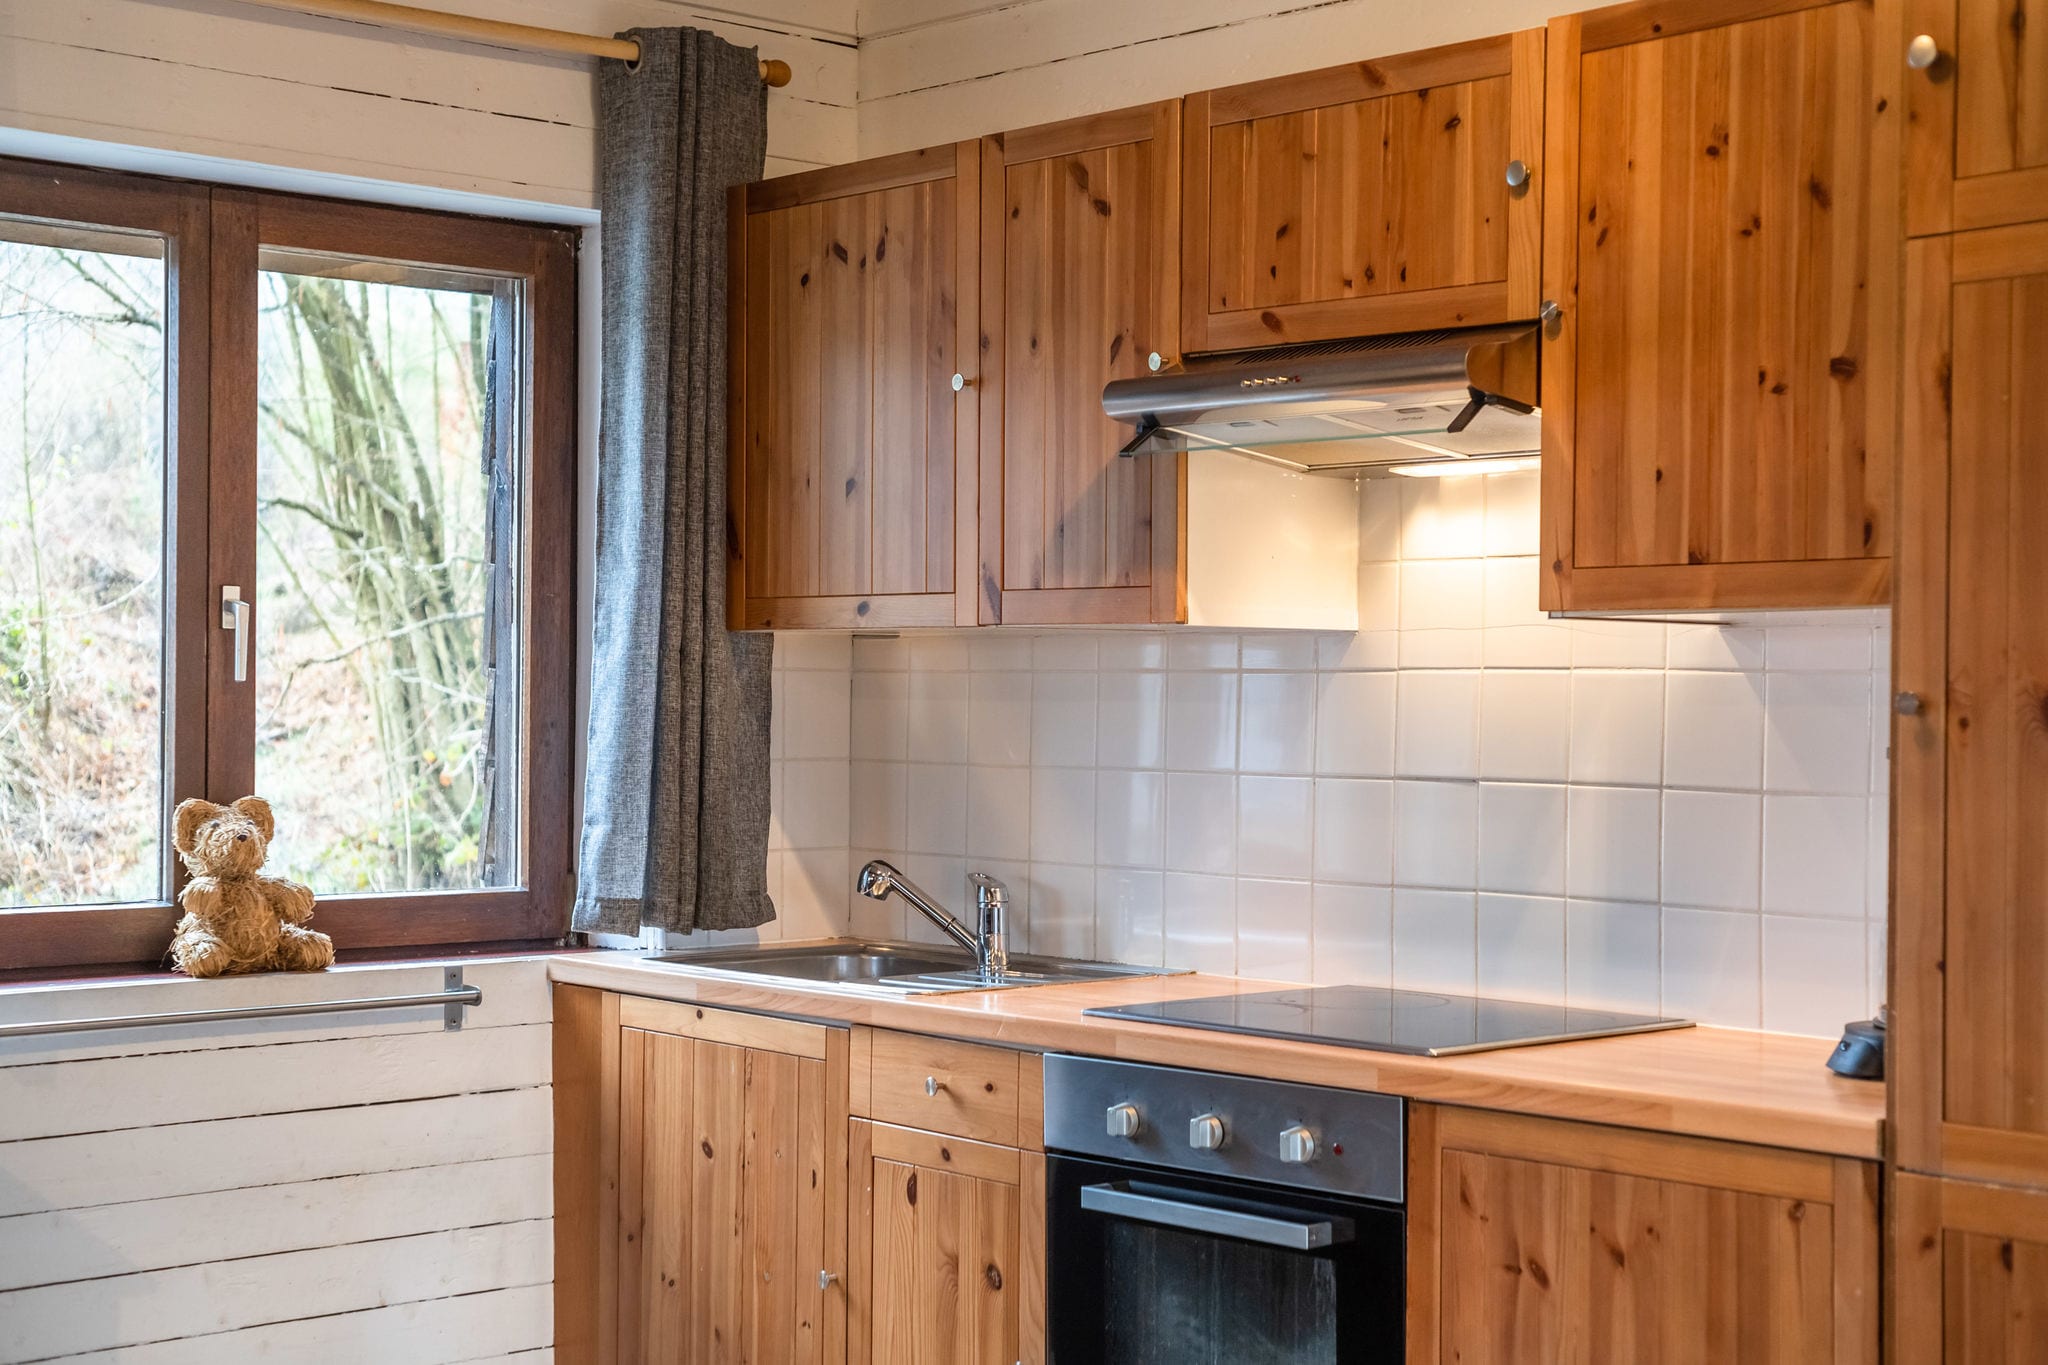 The cottage is a beautiful chalet and fully renovated